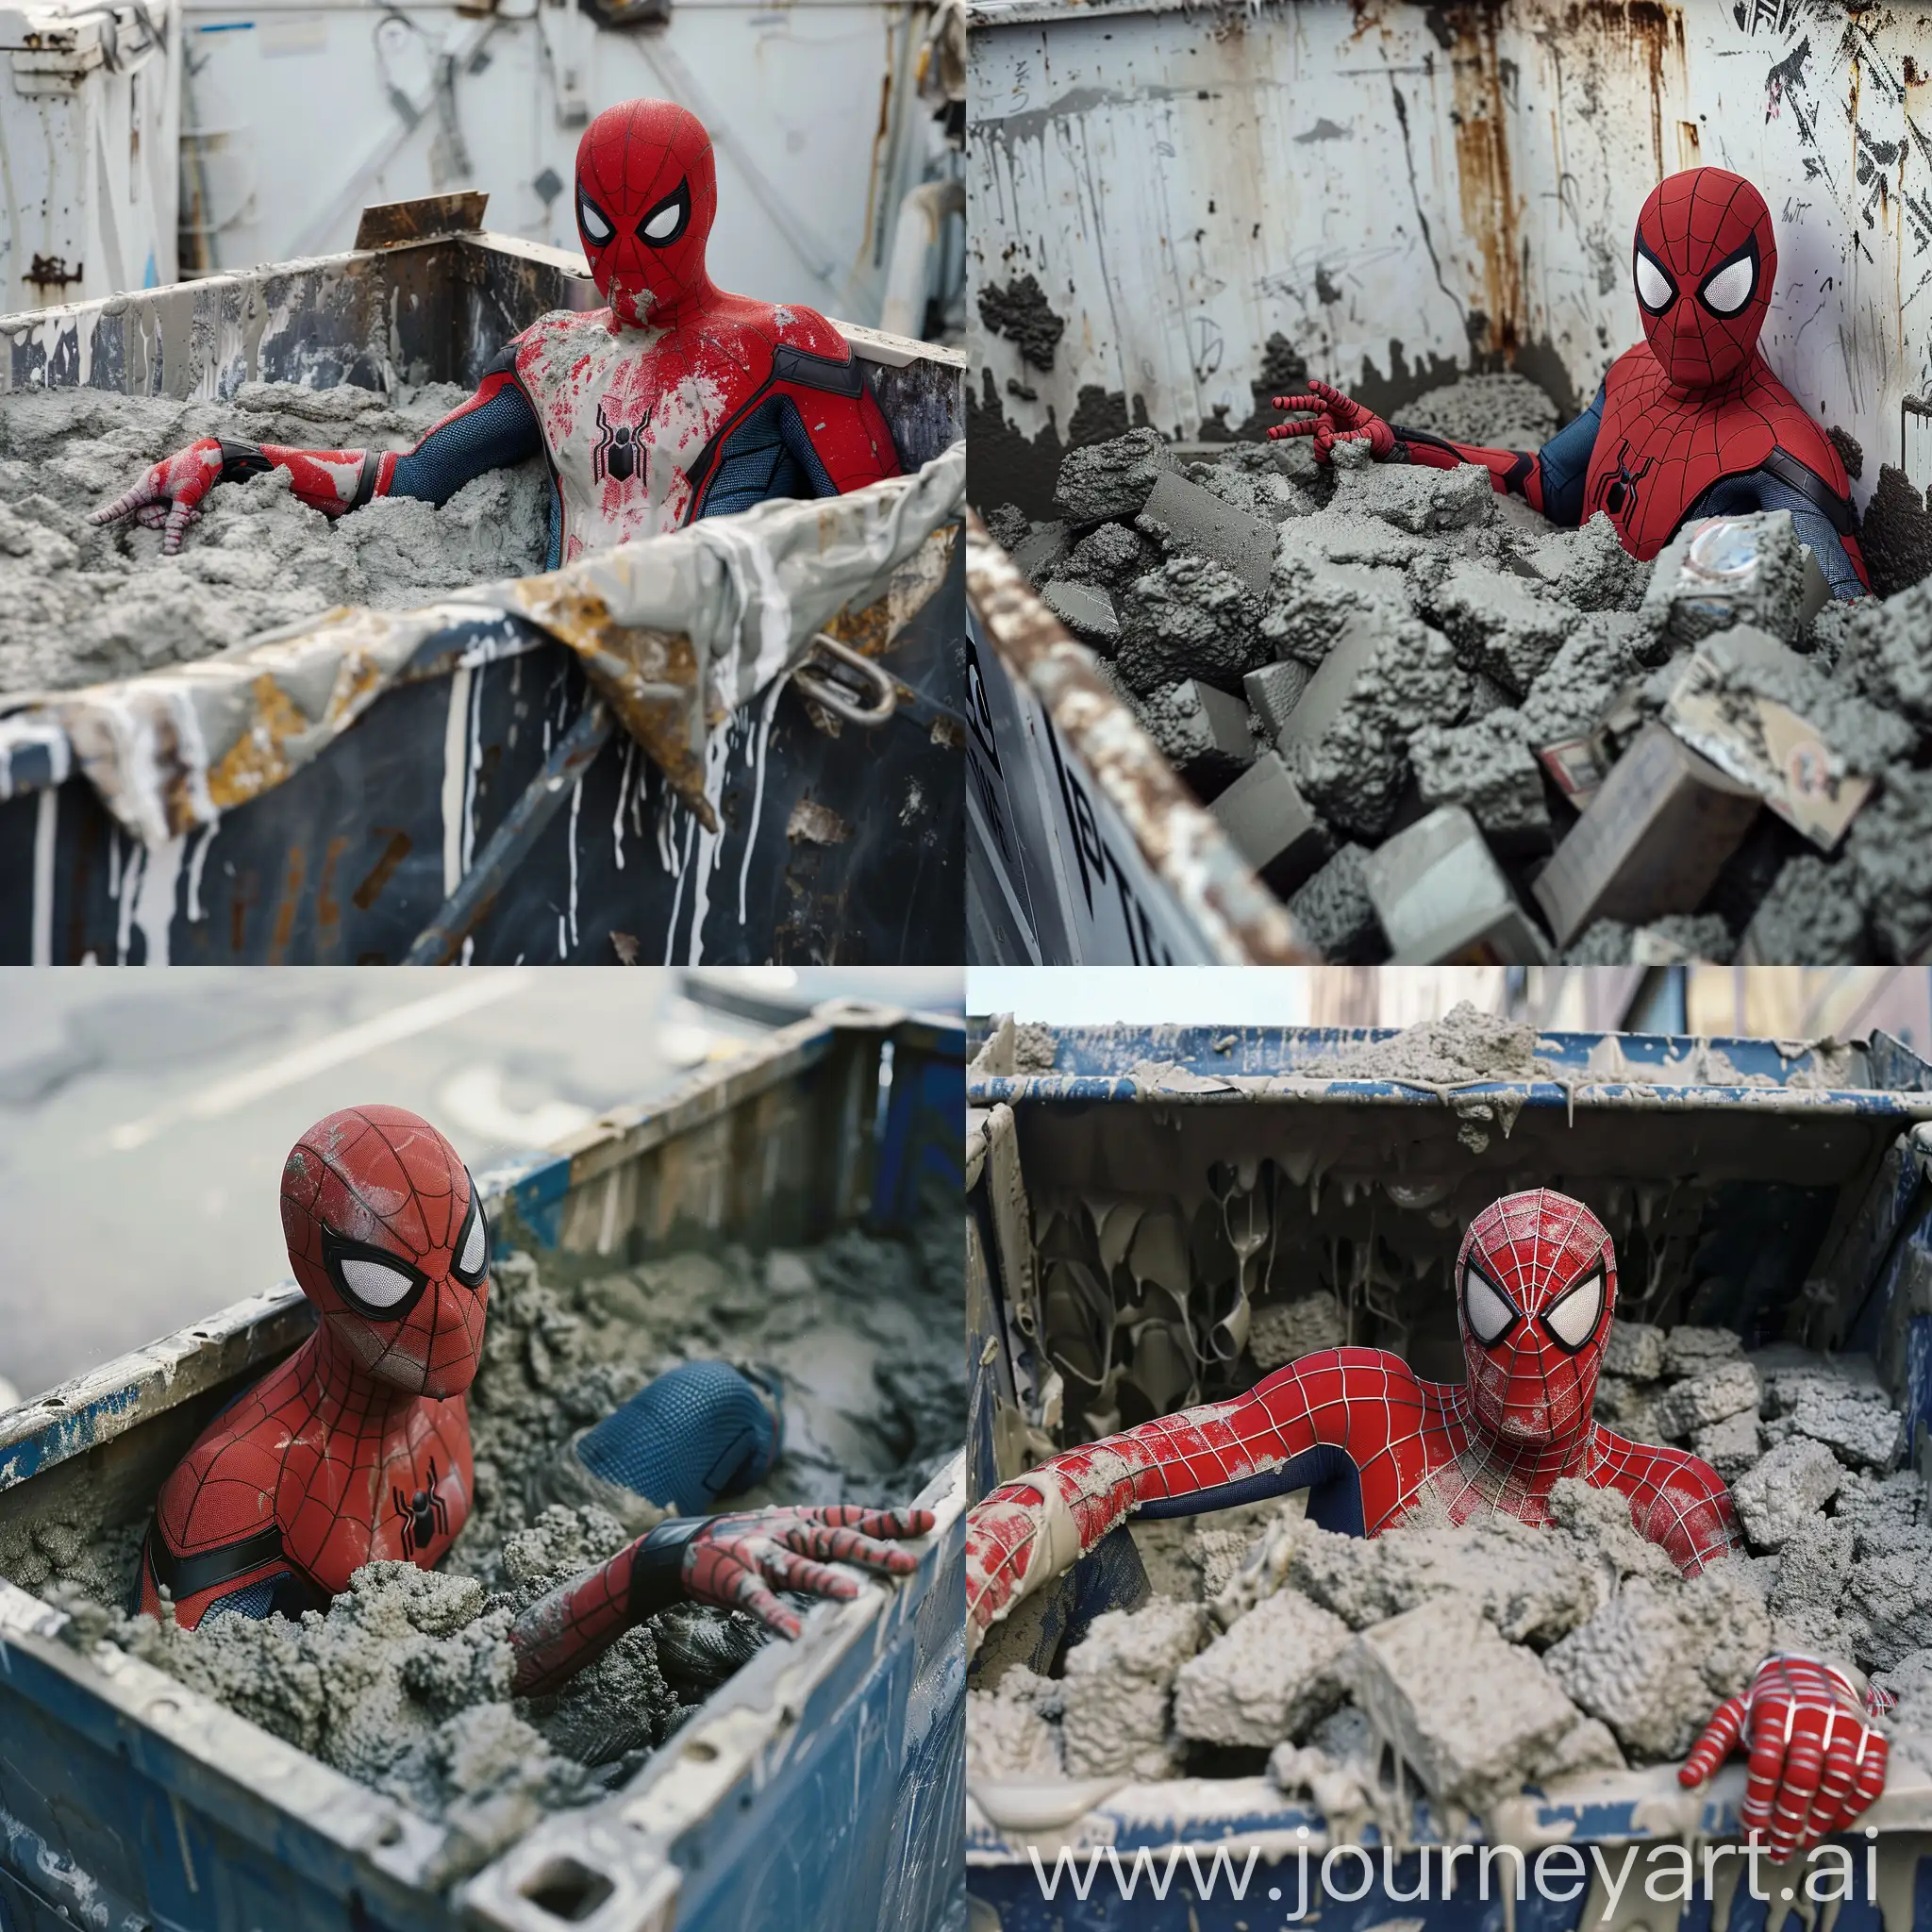 spiderman in a dumpster full of wet cement